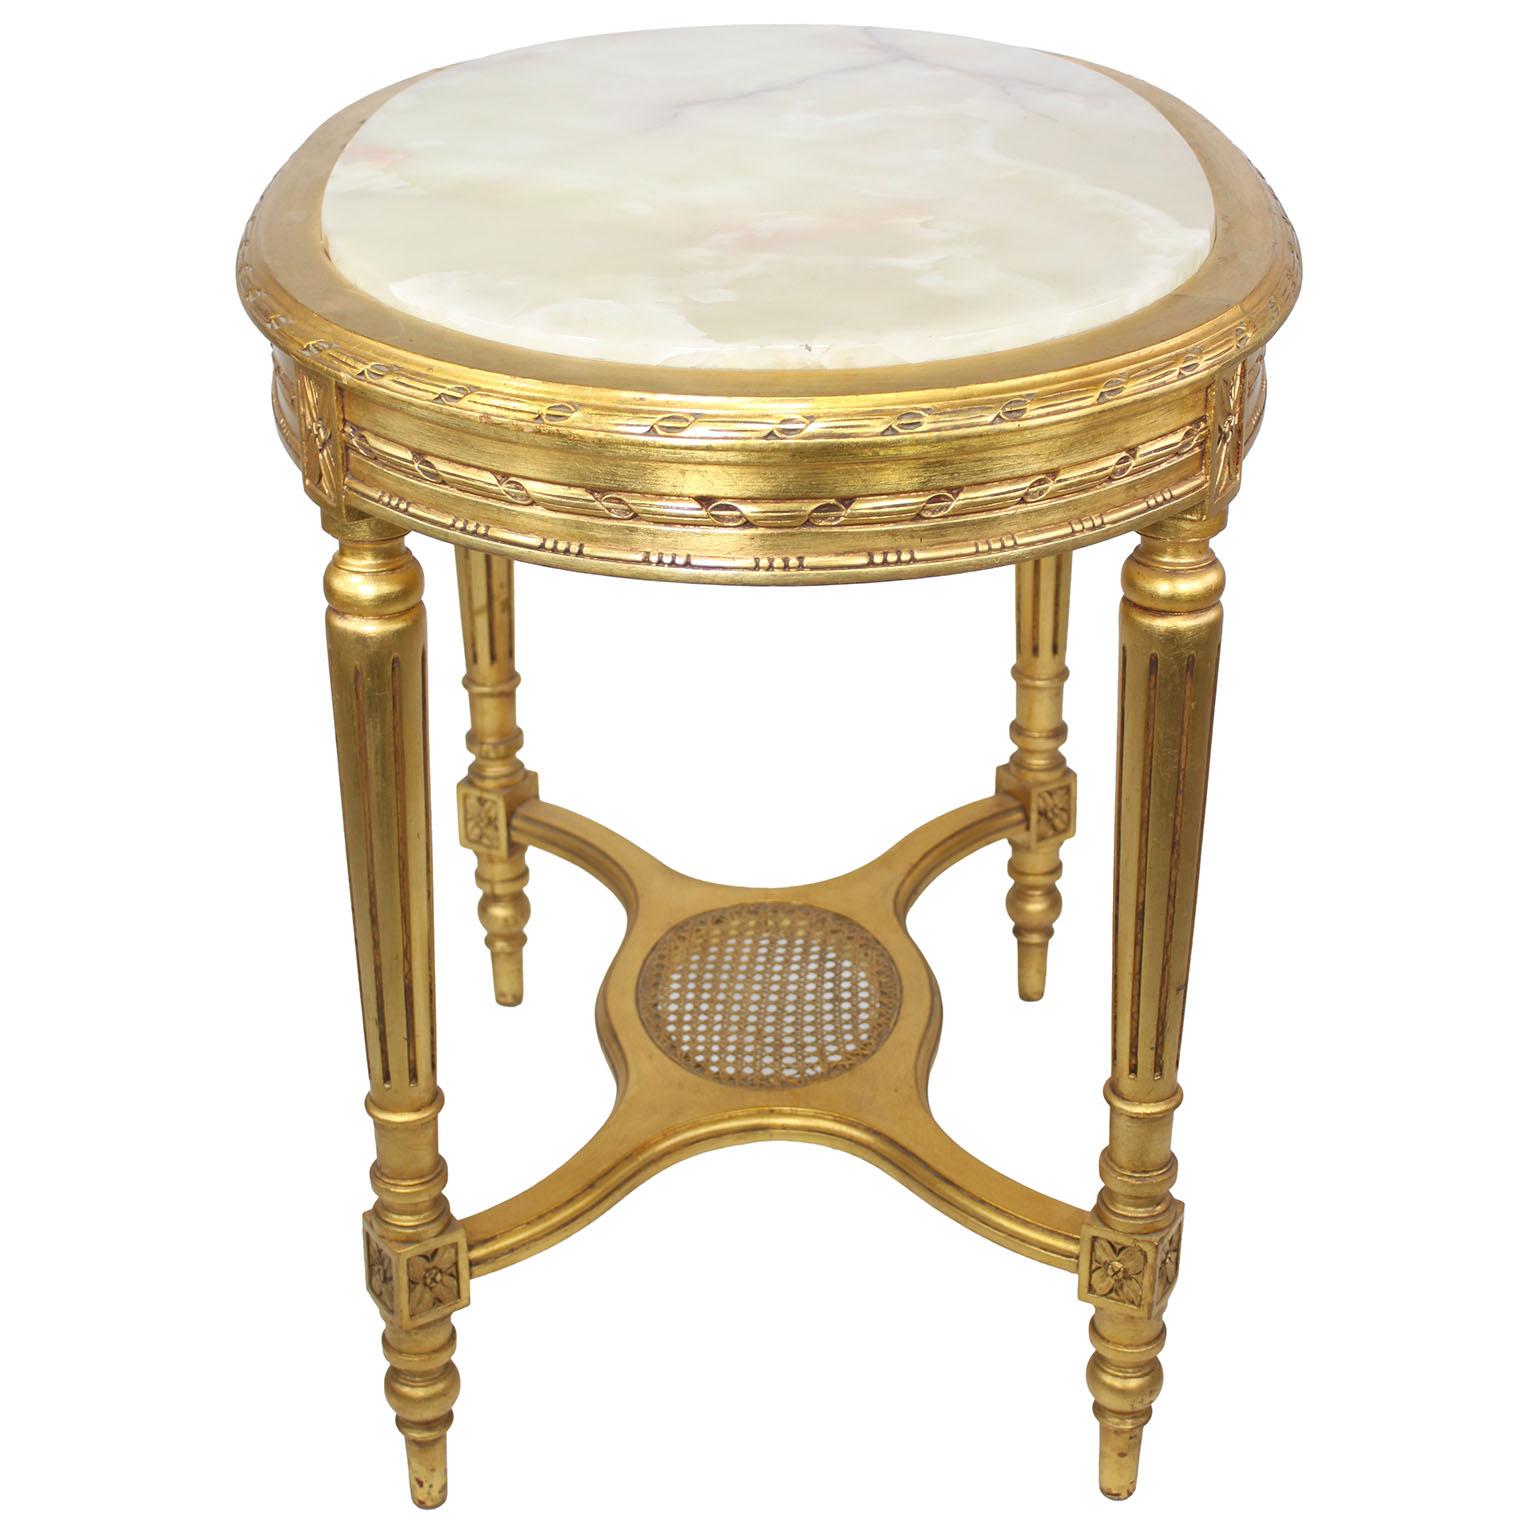 French Louis XVI Style Belle Époque Oval Giltwood Carved Center Table w/Onyx Top In Good Condition For Sale In Los Angeles, CA